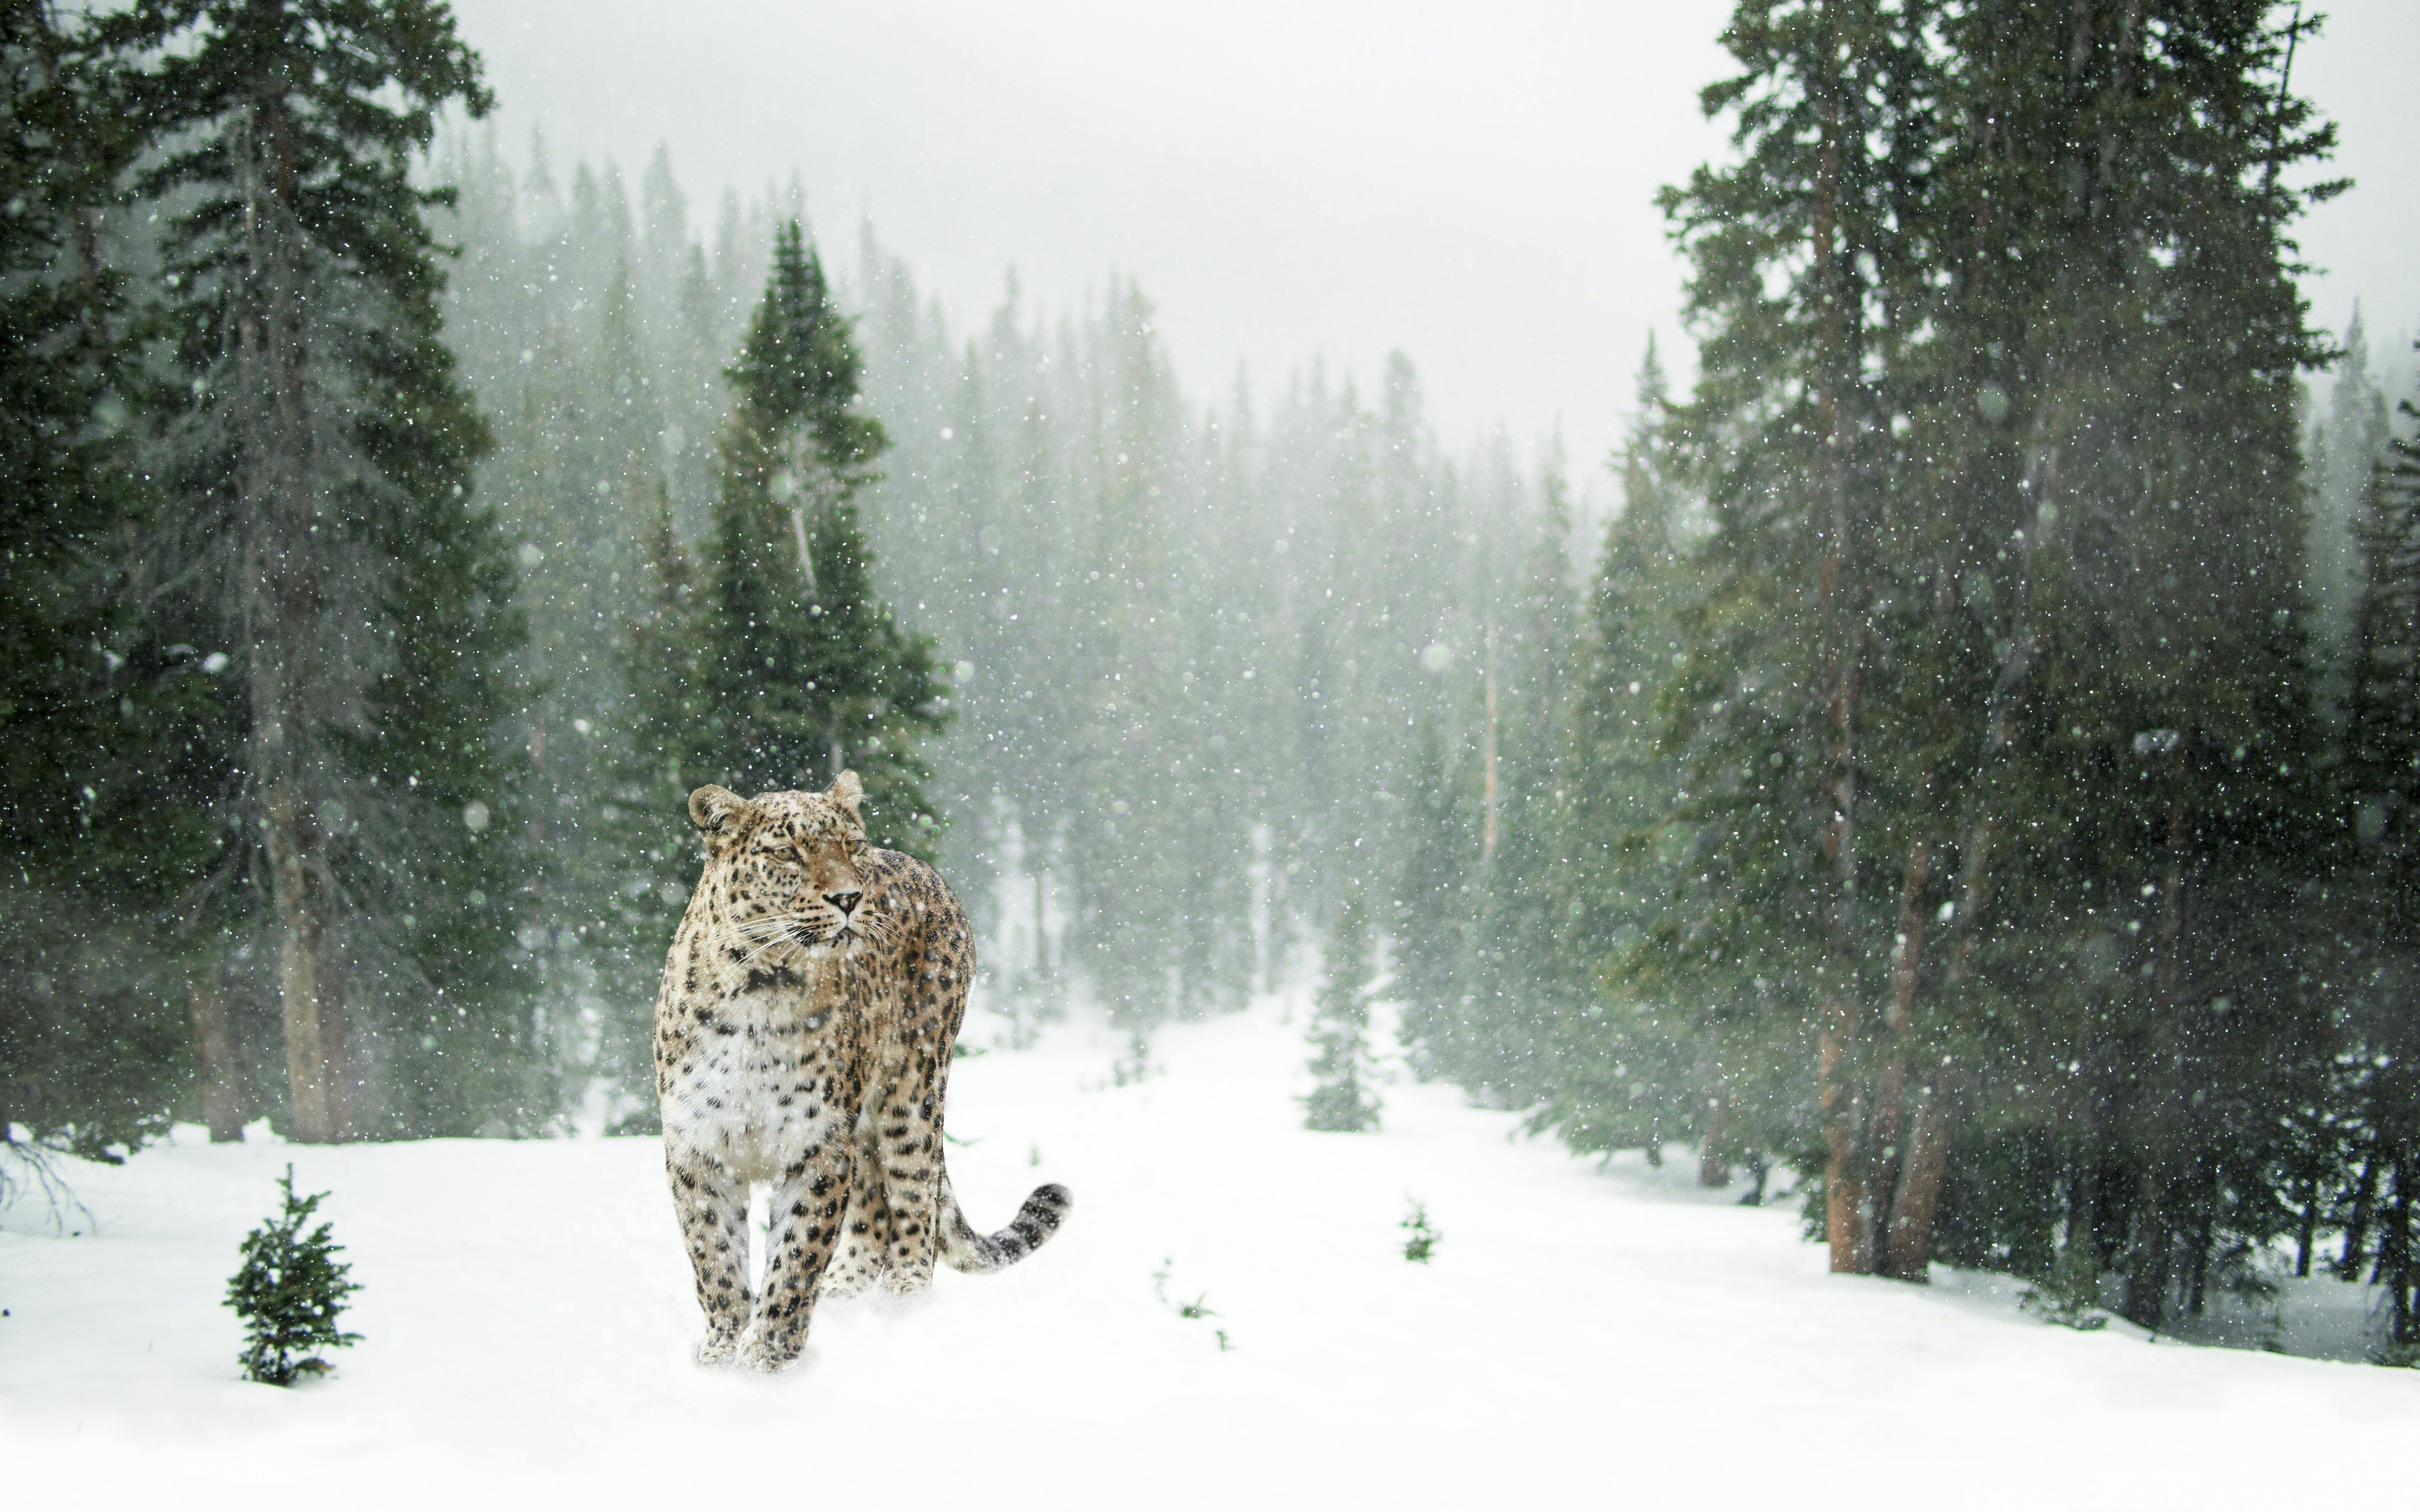 Snow leopard at a zoo | Free Photo - rawpixel